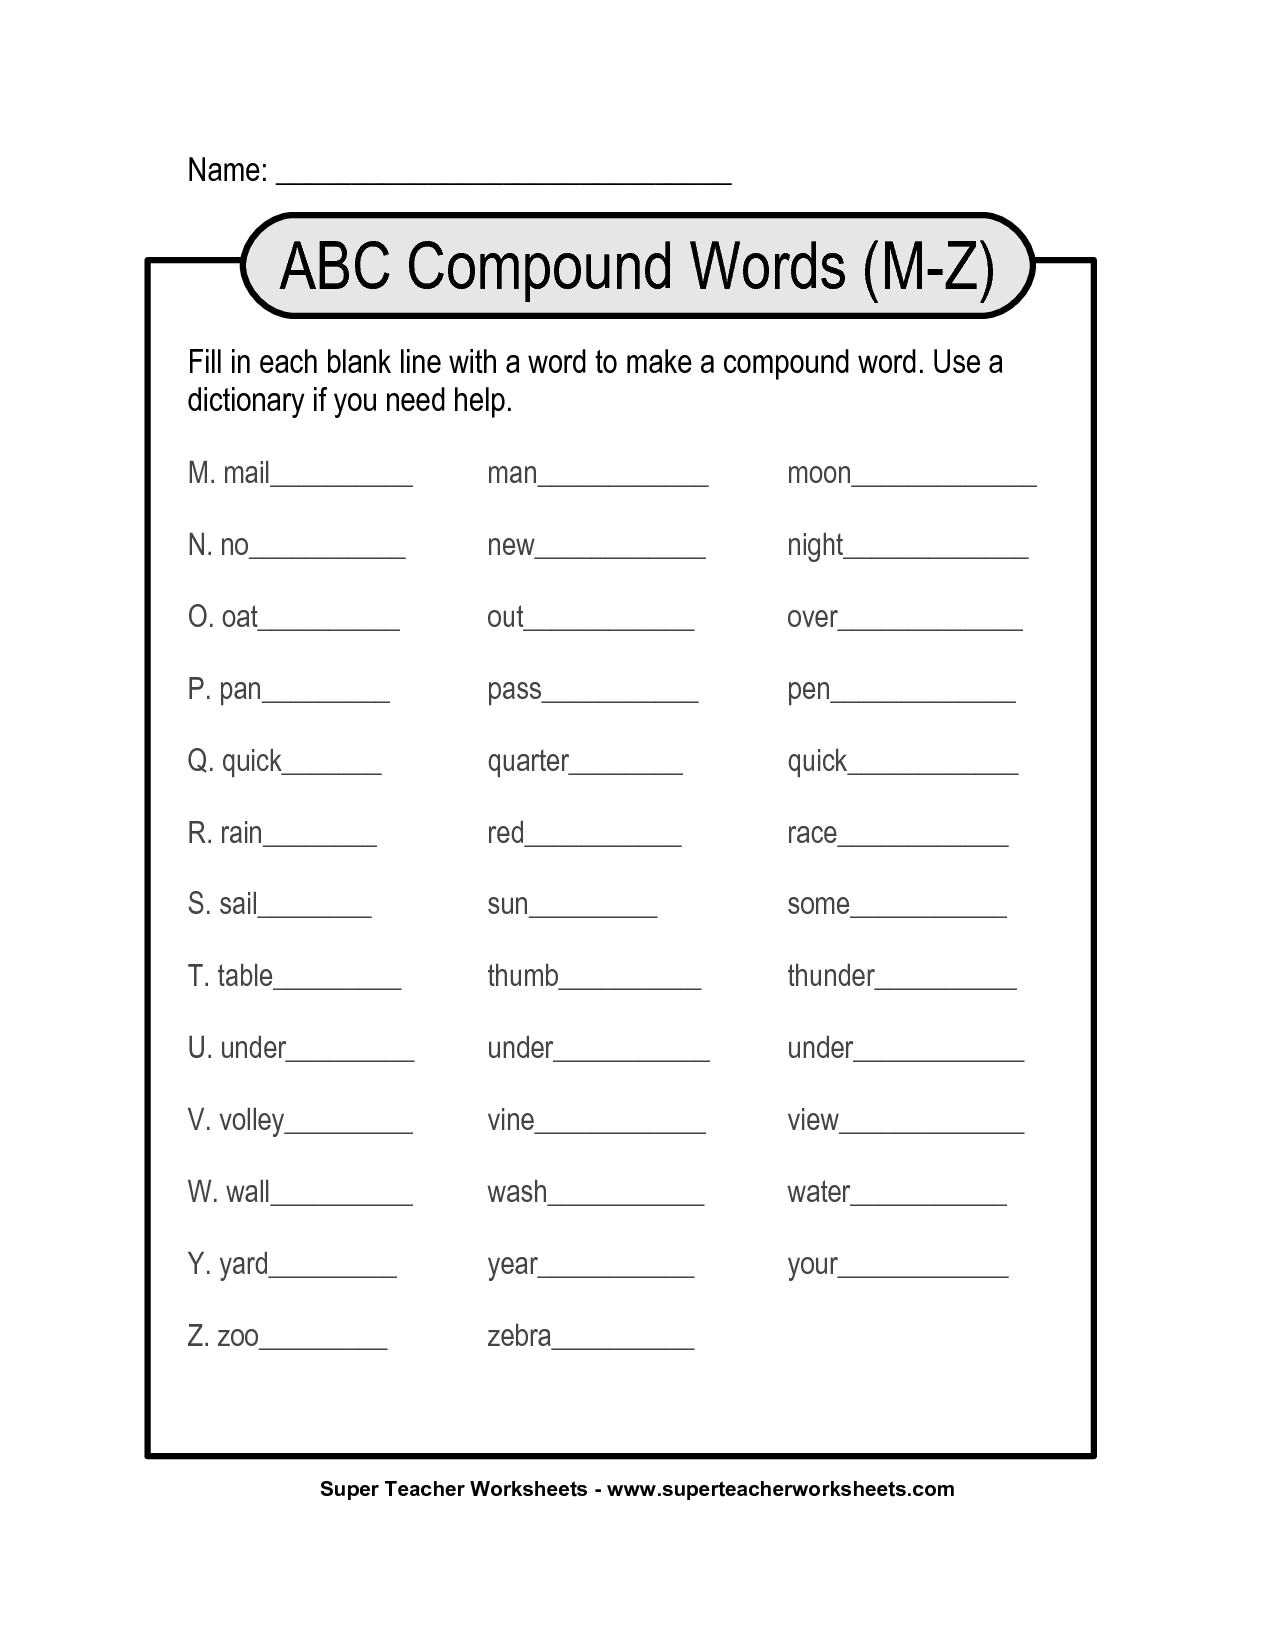 13-best-images-of-compound-words-worksheets-2nd-grade-compound-words